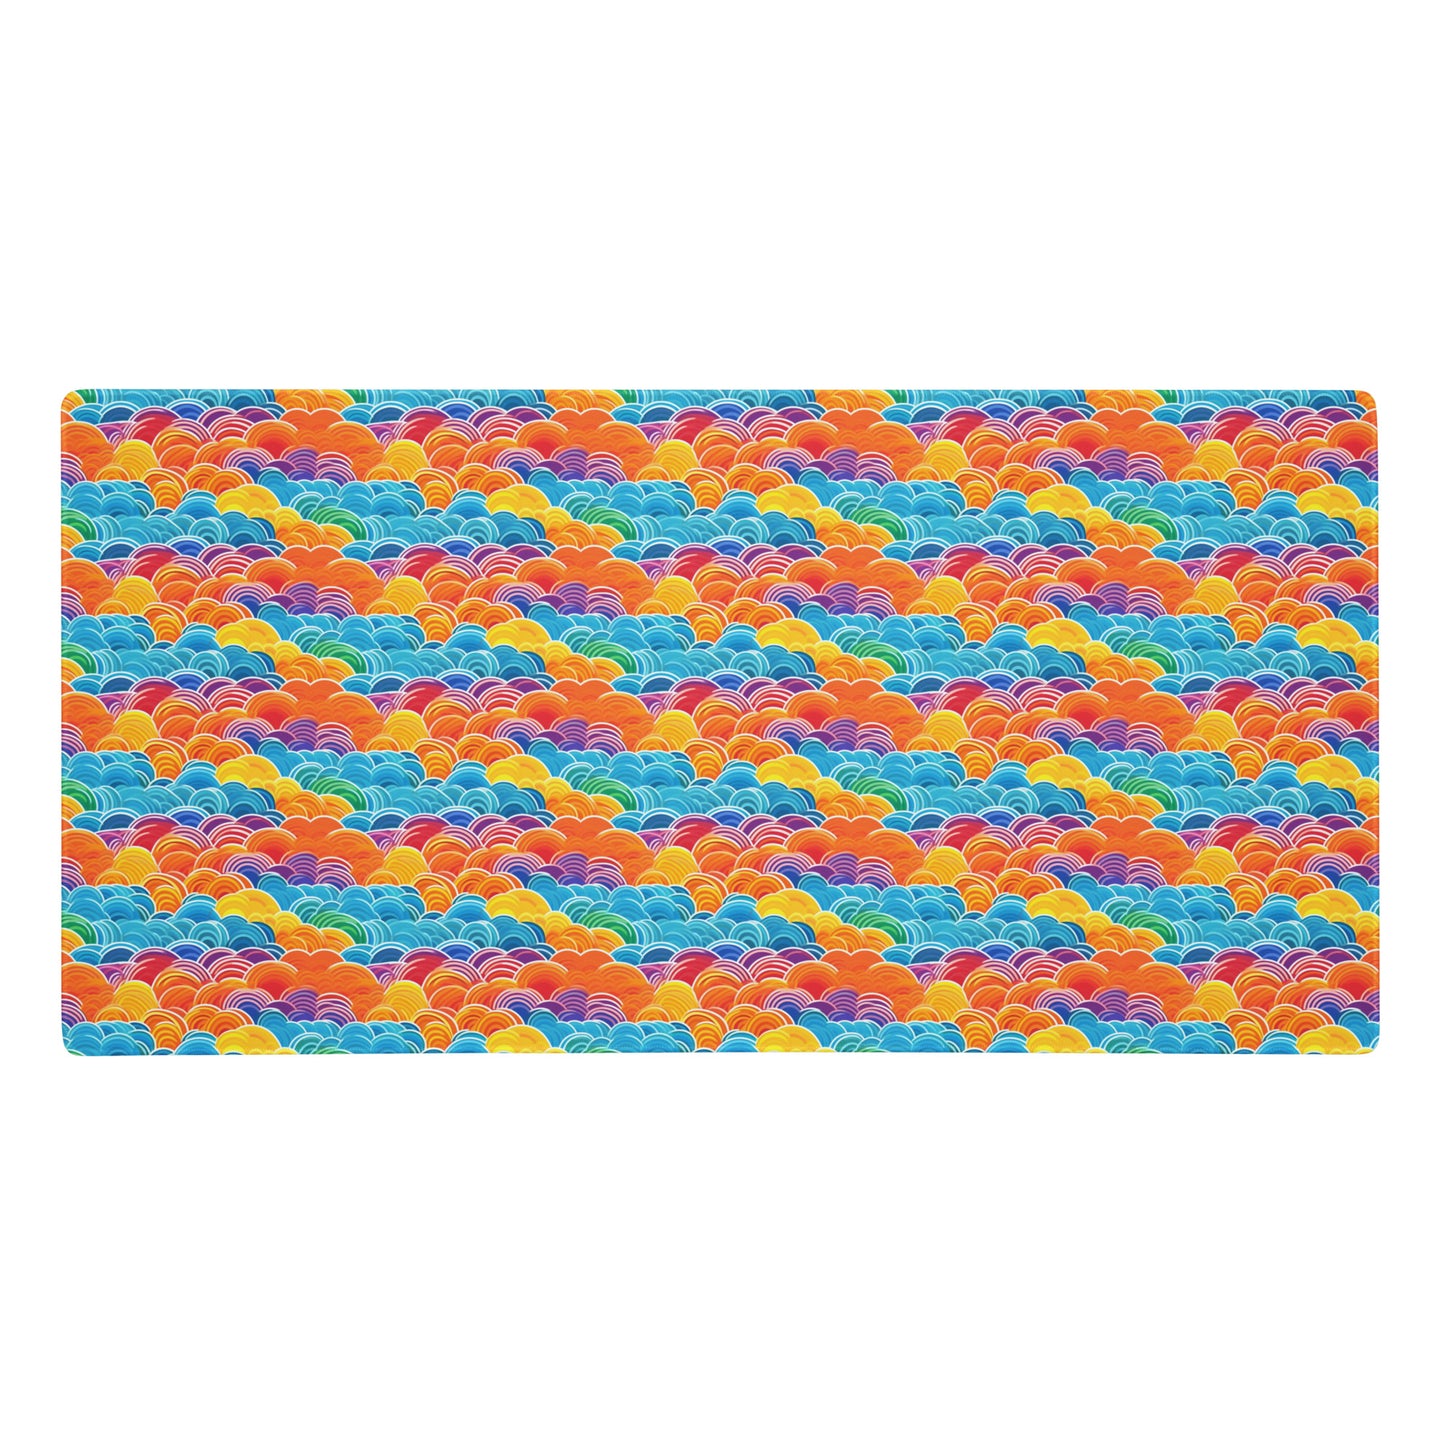 A 36" x 18" desk pad with bubbly swirly clouds all over it. Rainbow colored.